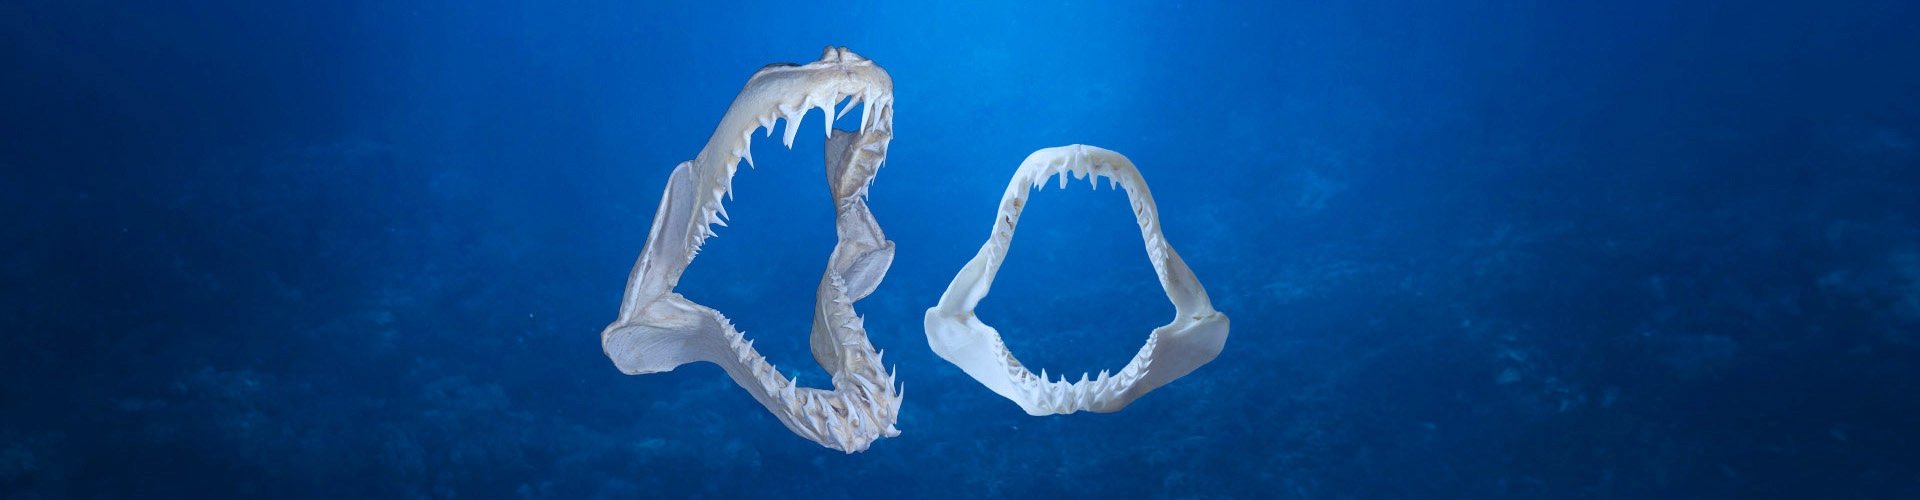 Collection of shark jaws and teeth